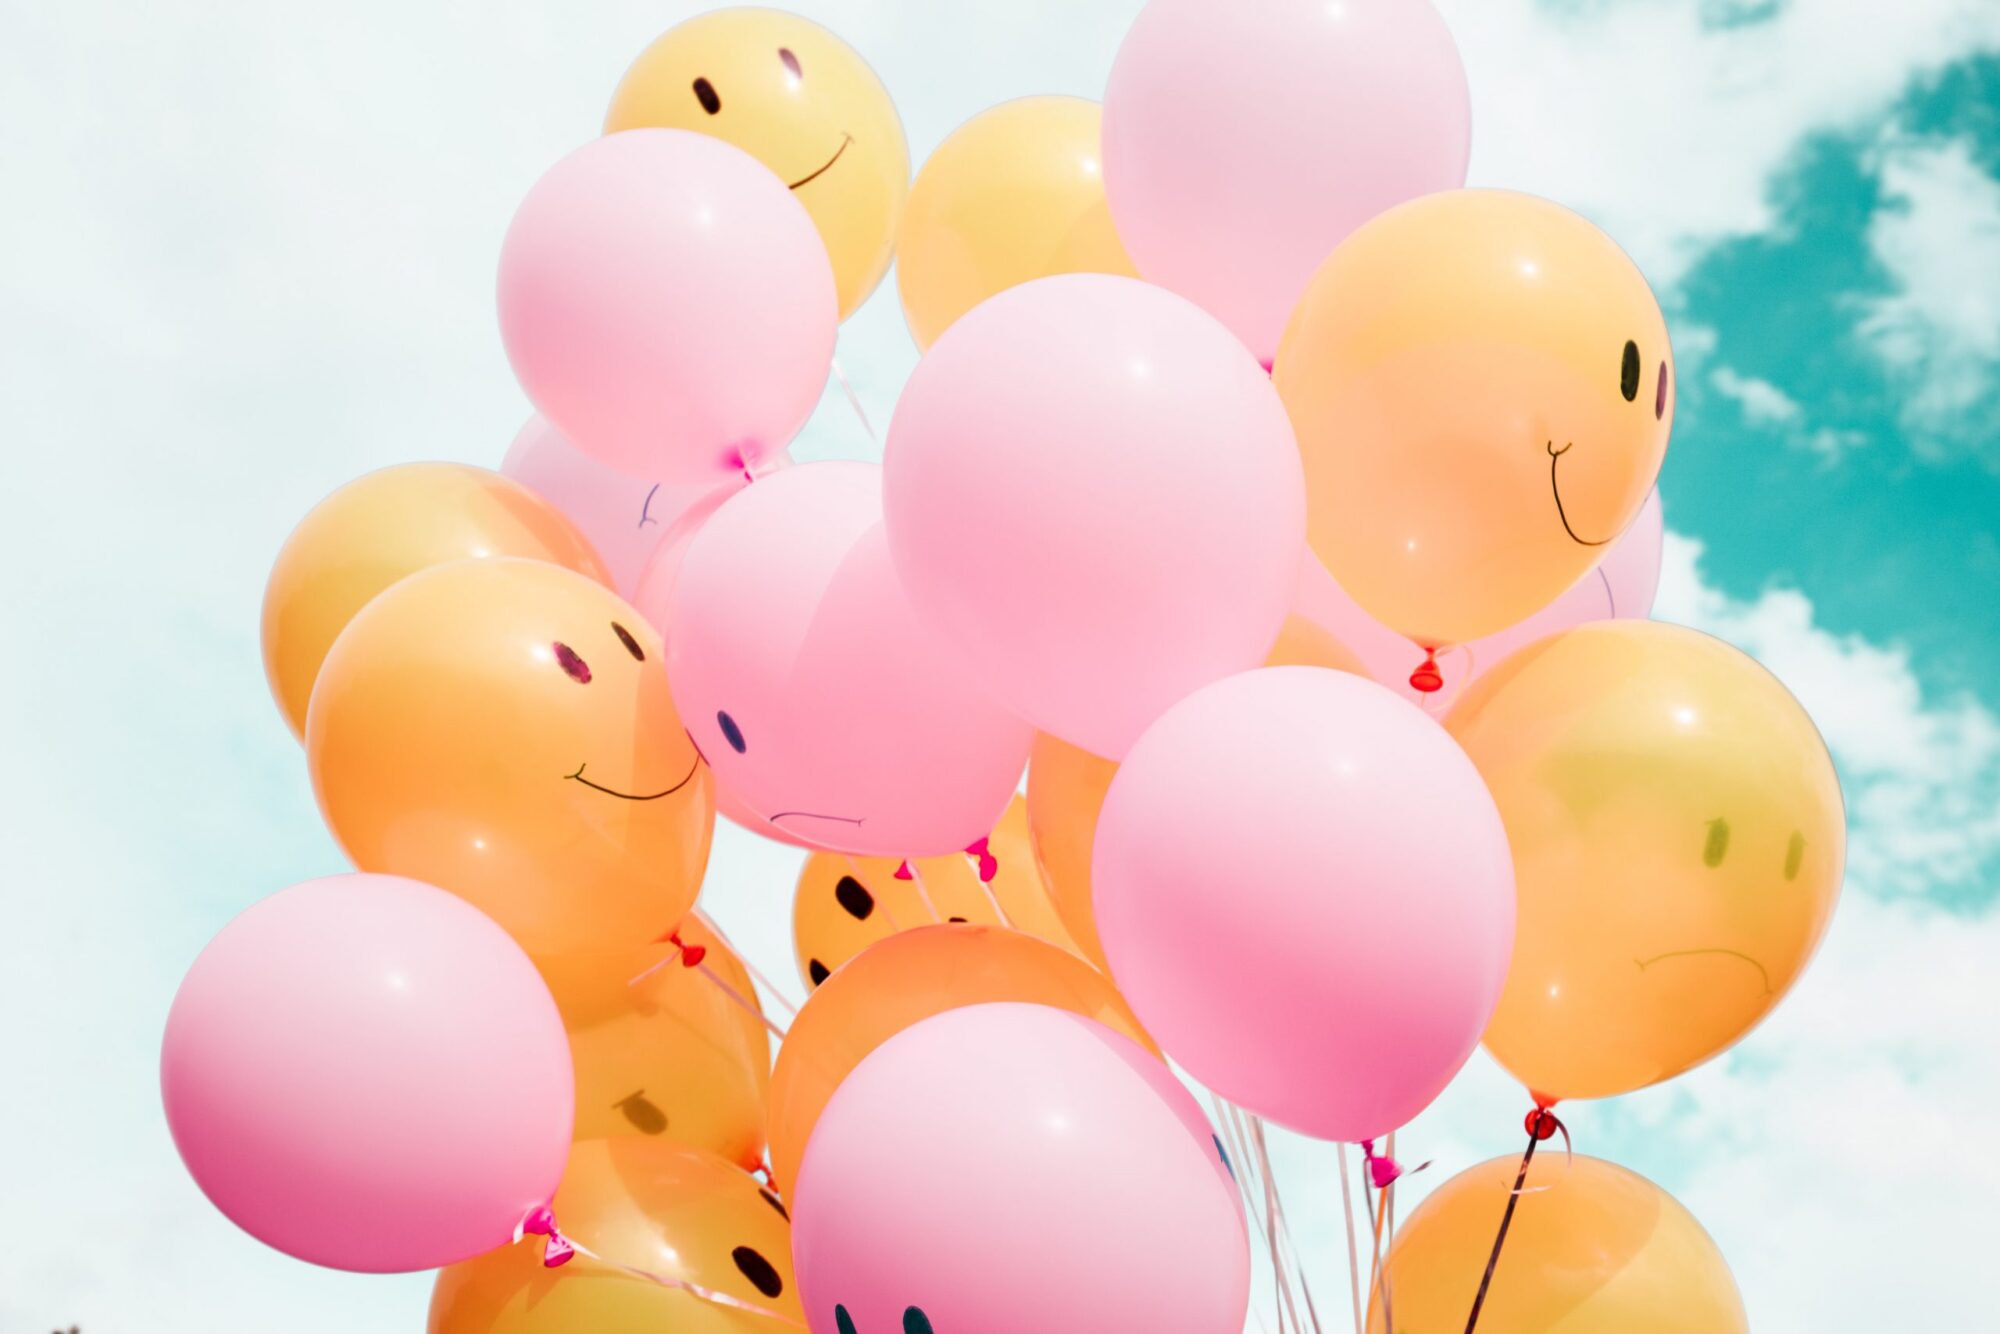 Many balloons with smileys on